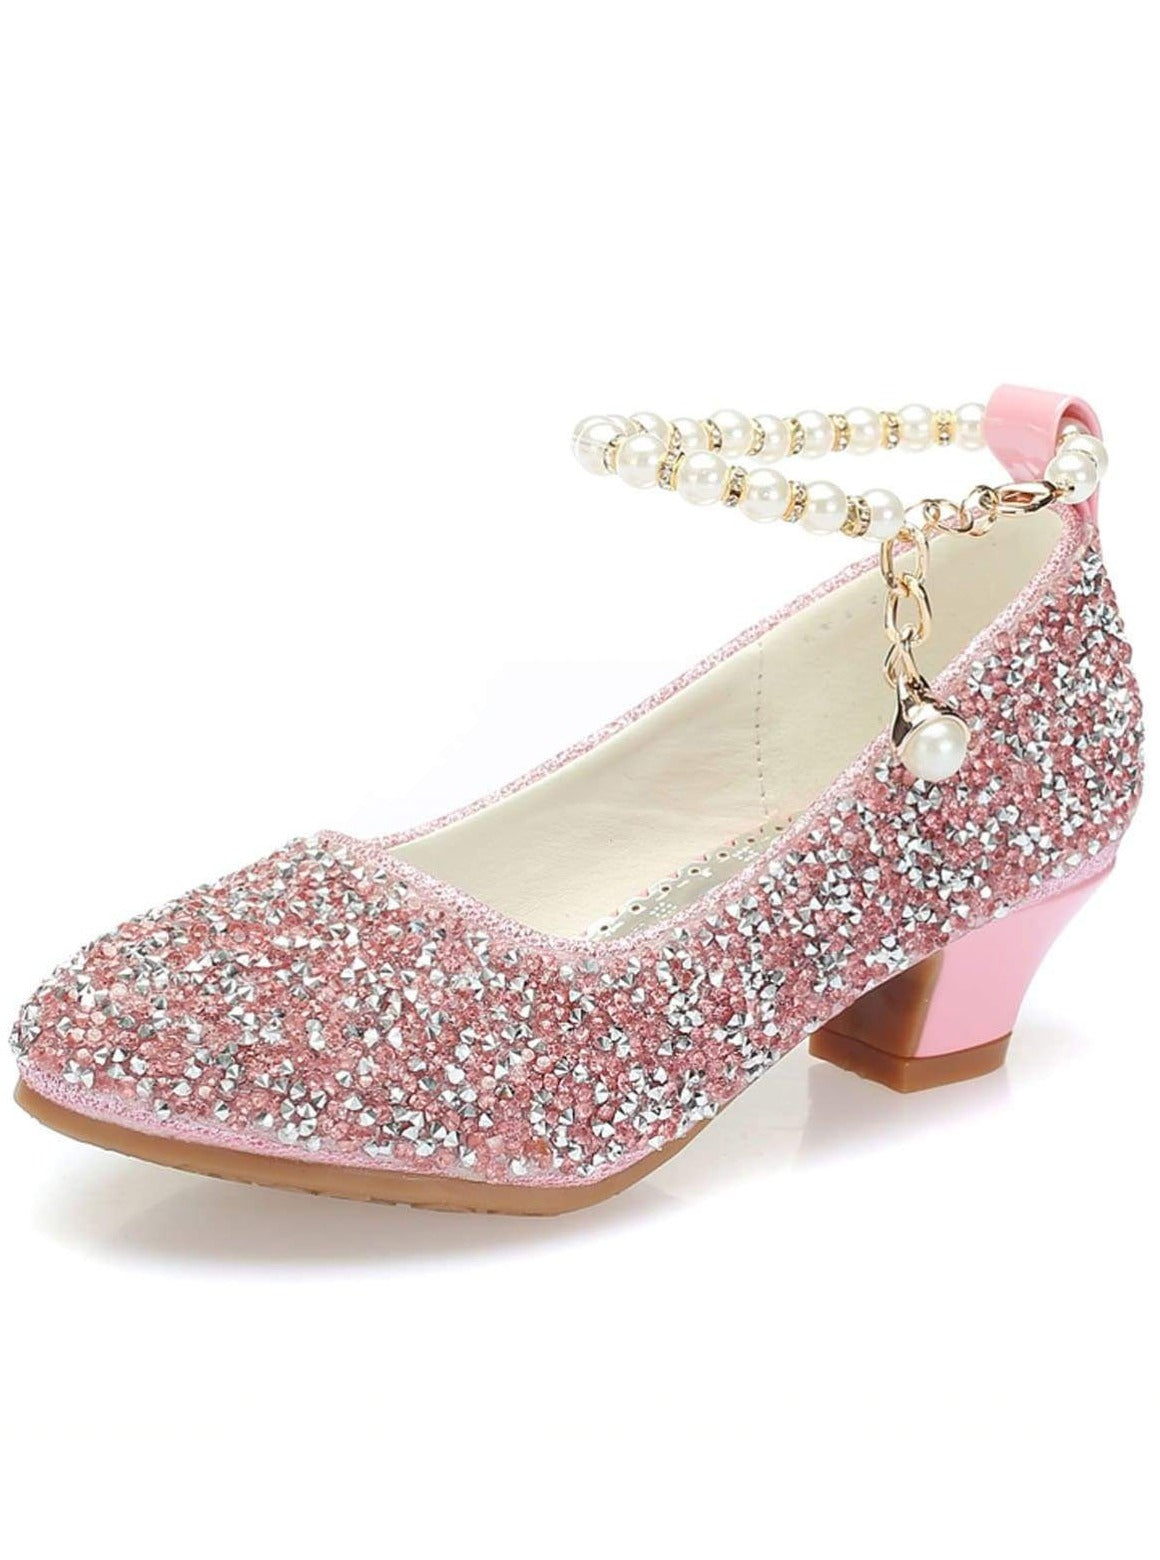 Girls Glittering Sequined Flats with Pearl Embellished Ankle Strap and ...